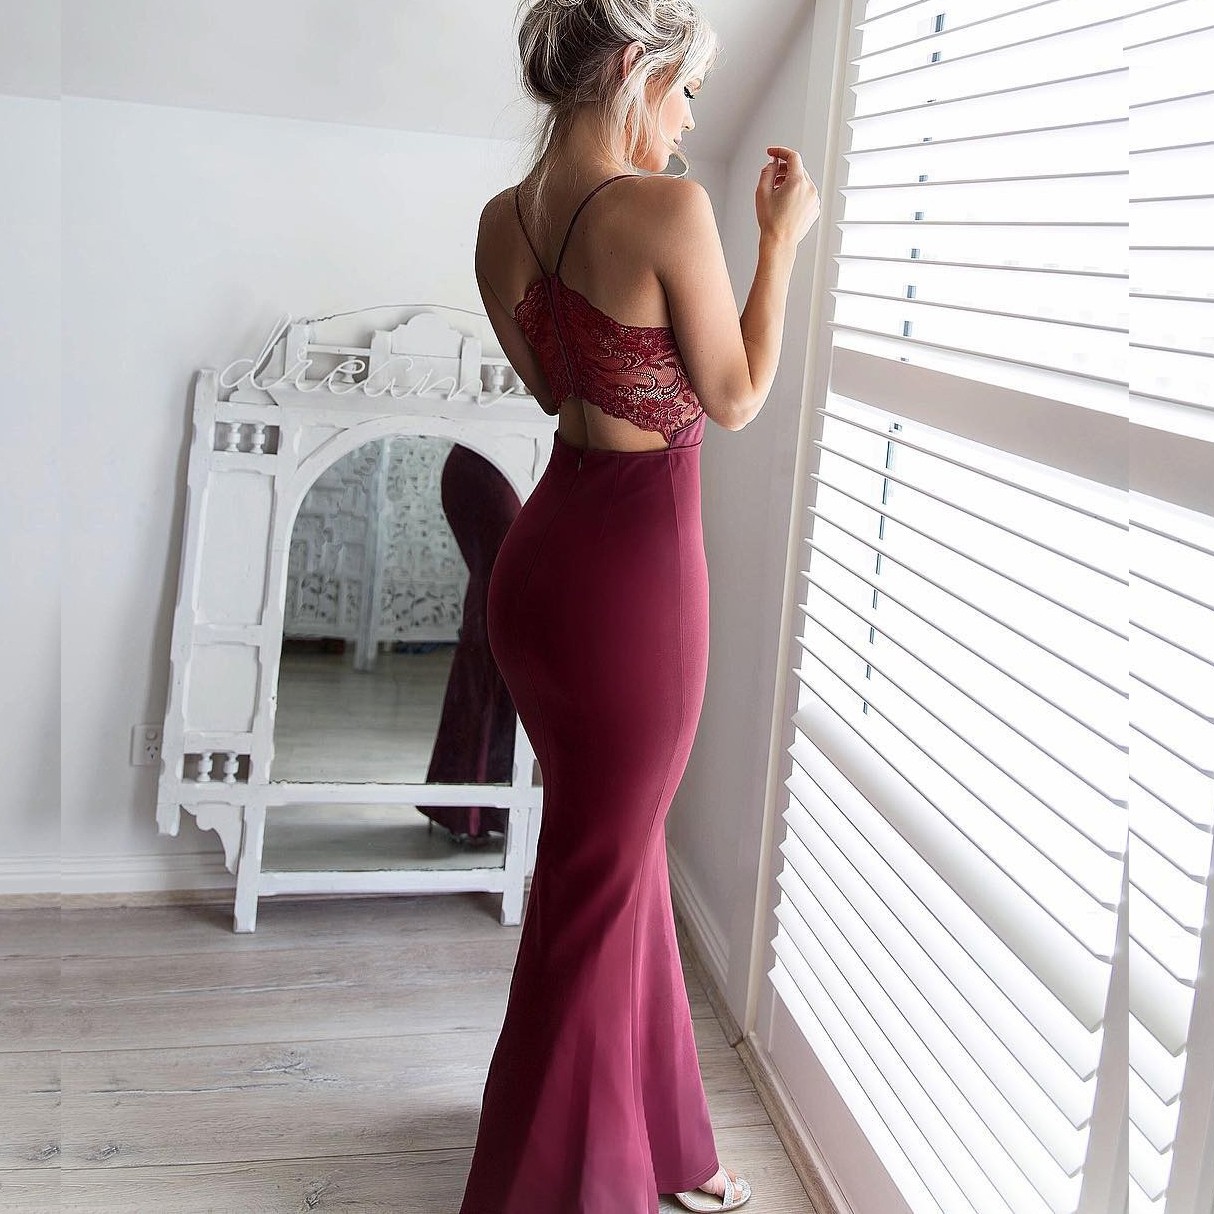 Mermaid Style Long Spaghetti Straps Open Back Prom Dress with Lace Beading